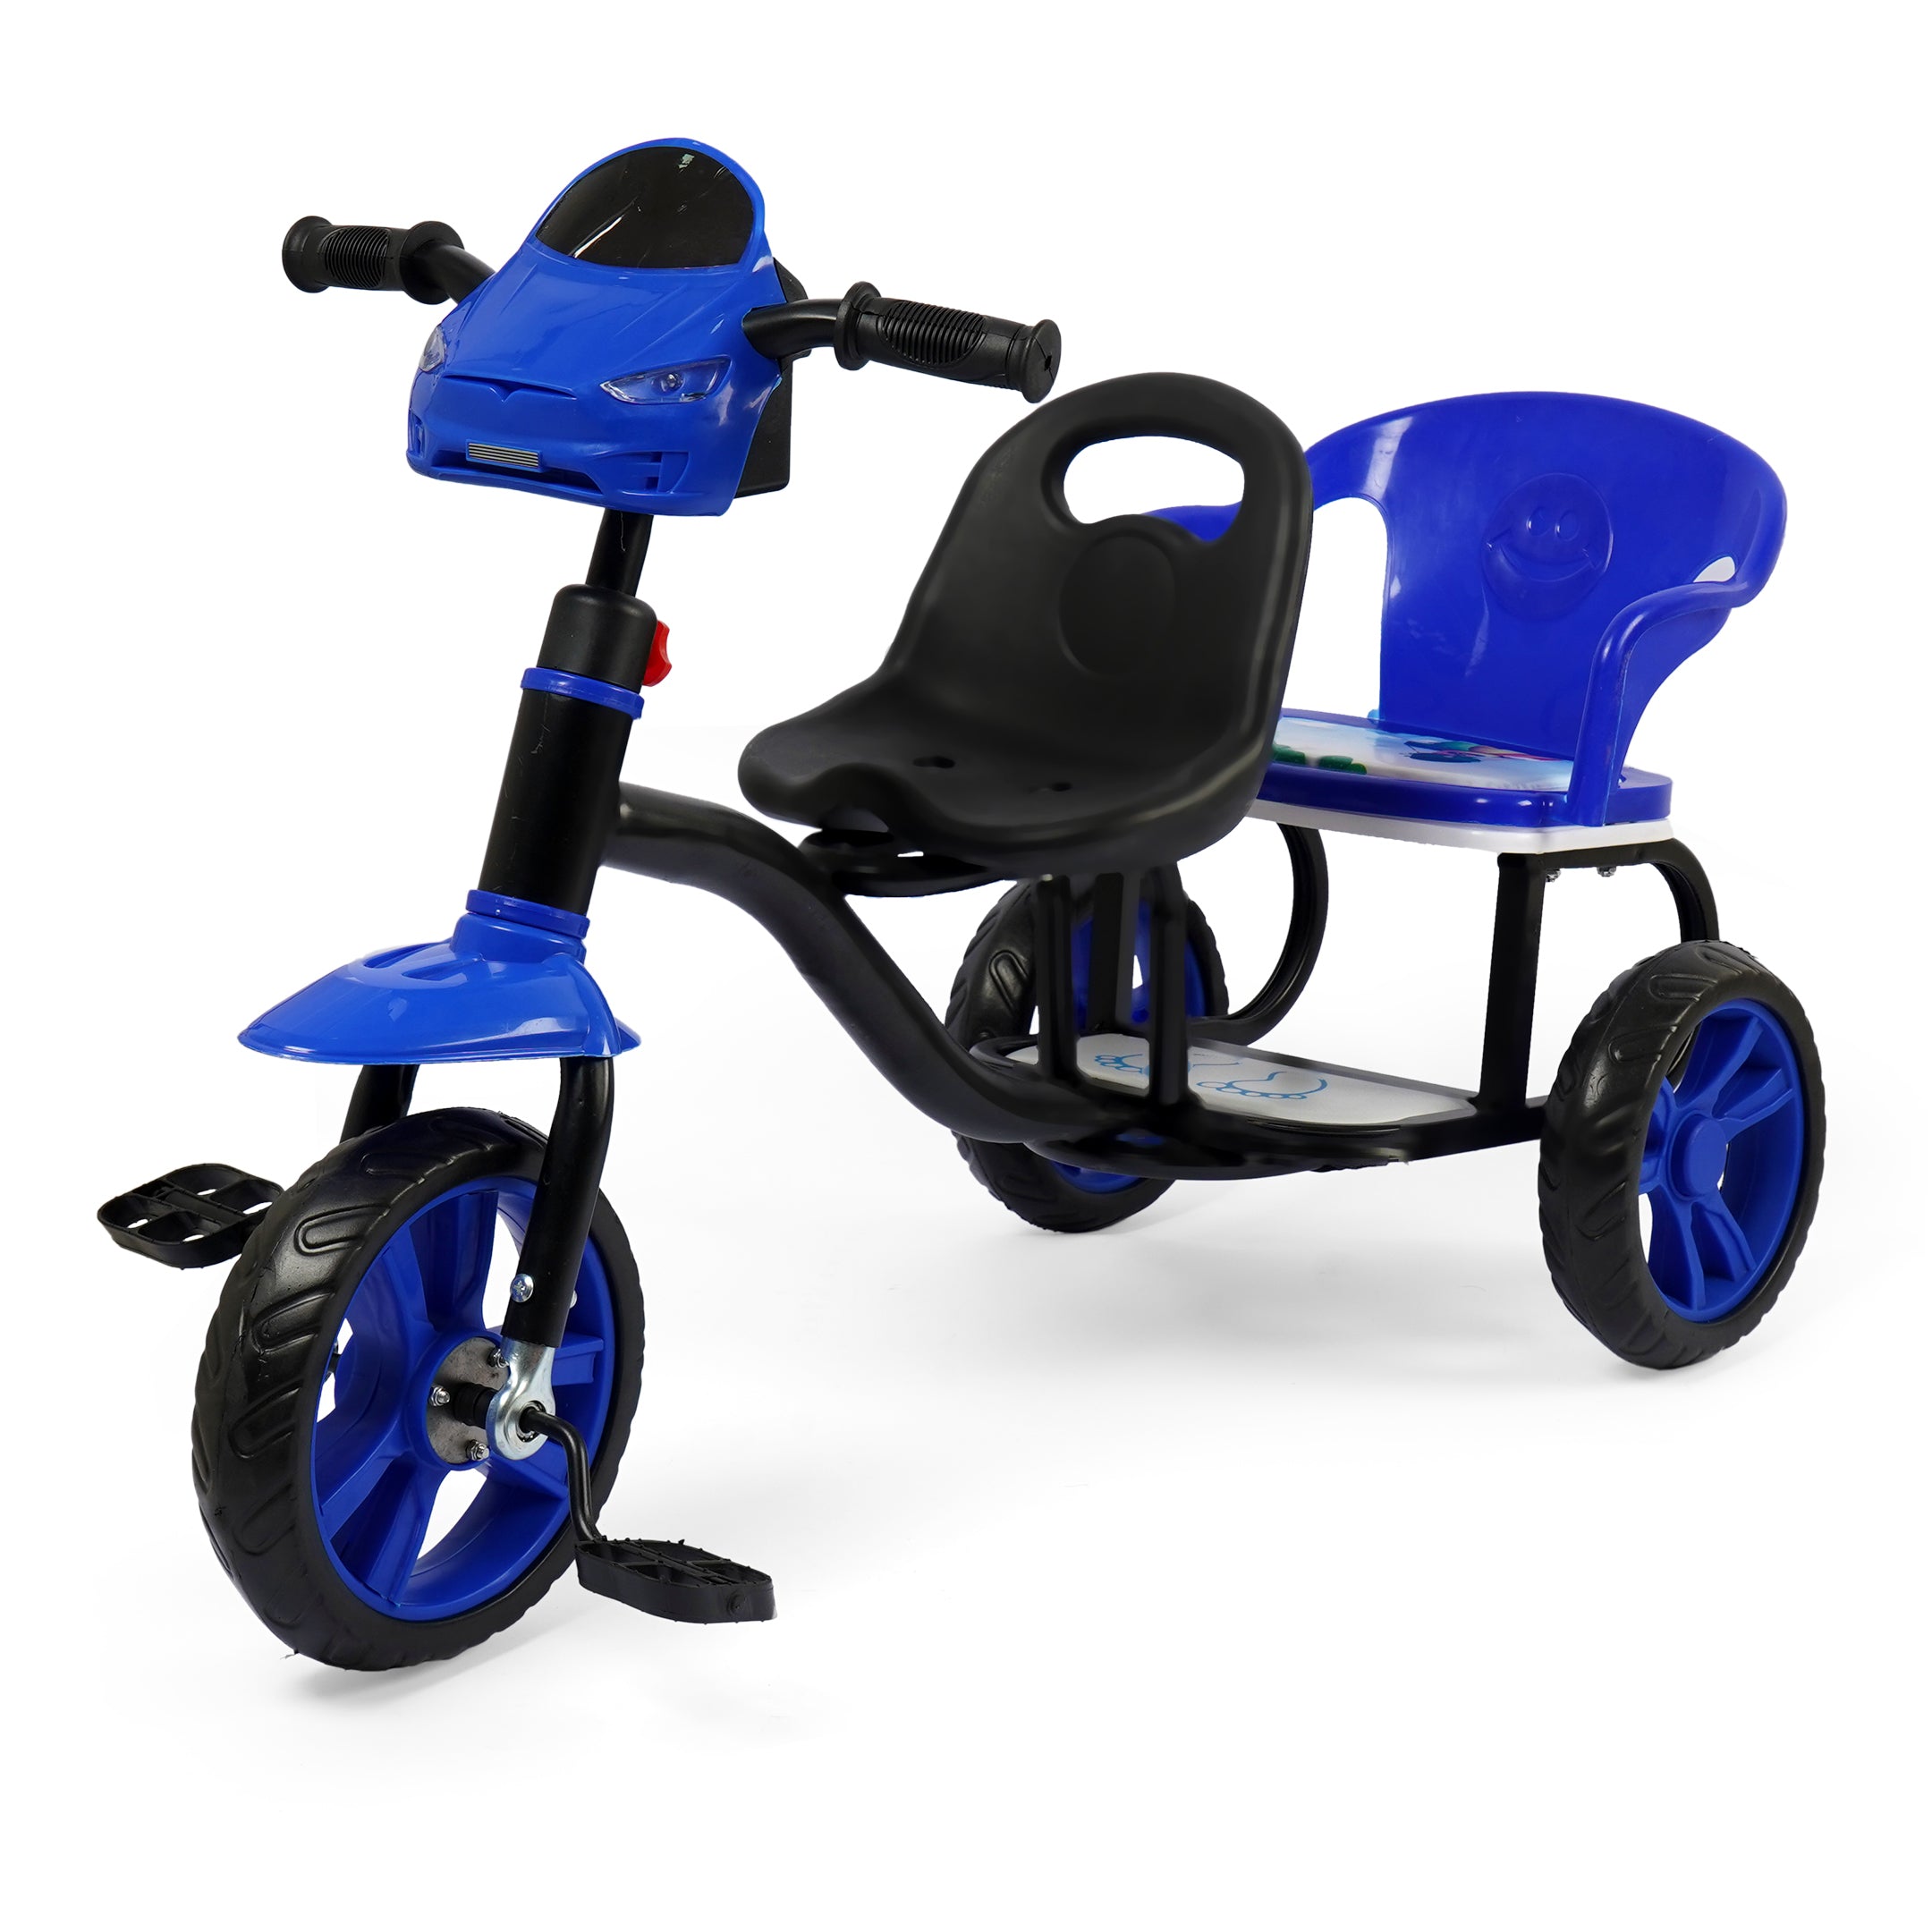 High-Quality Twin Seater Tricycle - Blue